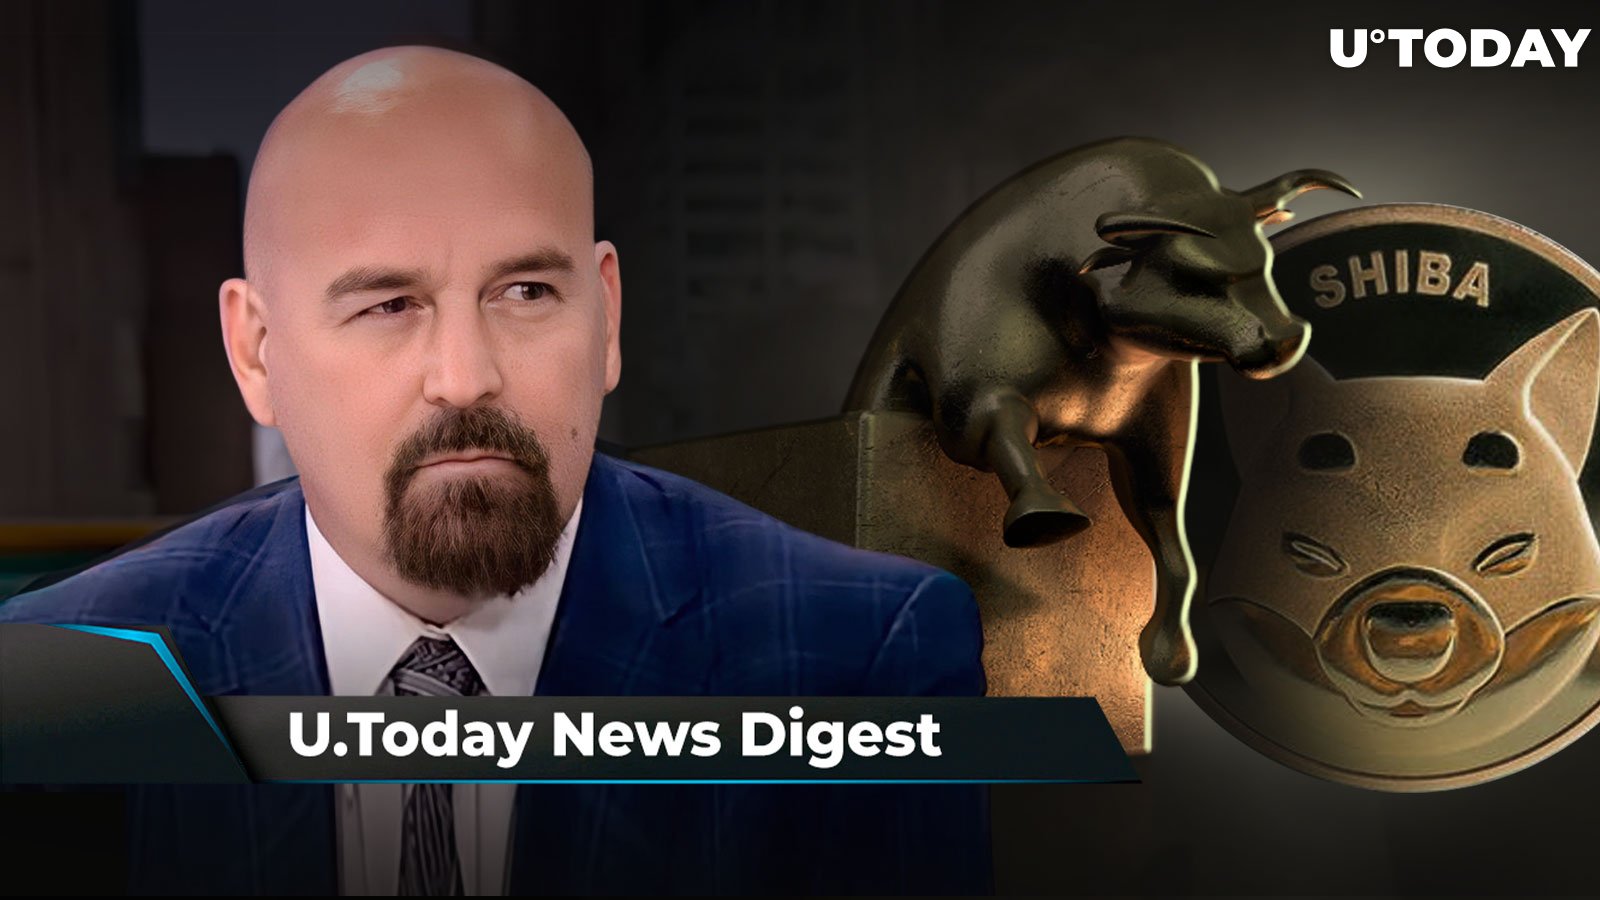 SHIB, LUNC, APE Listed by Australian Exchange, John Deaton Tells Why SEC's Wrong about XRP, SHIB Lead Dev Sends Bullish Message: Crypto News Digest by U.Today